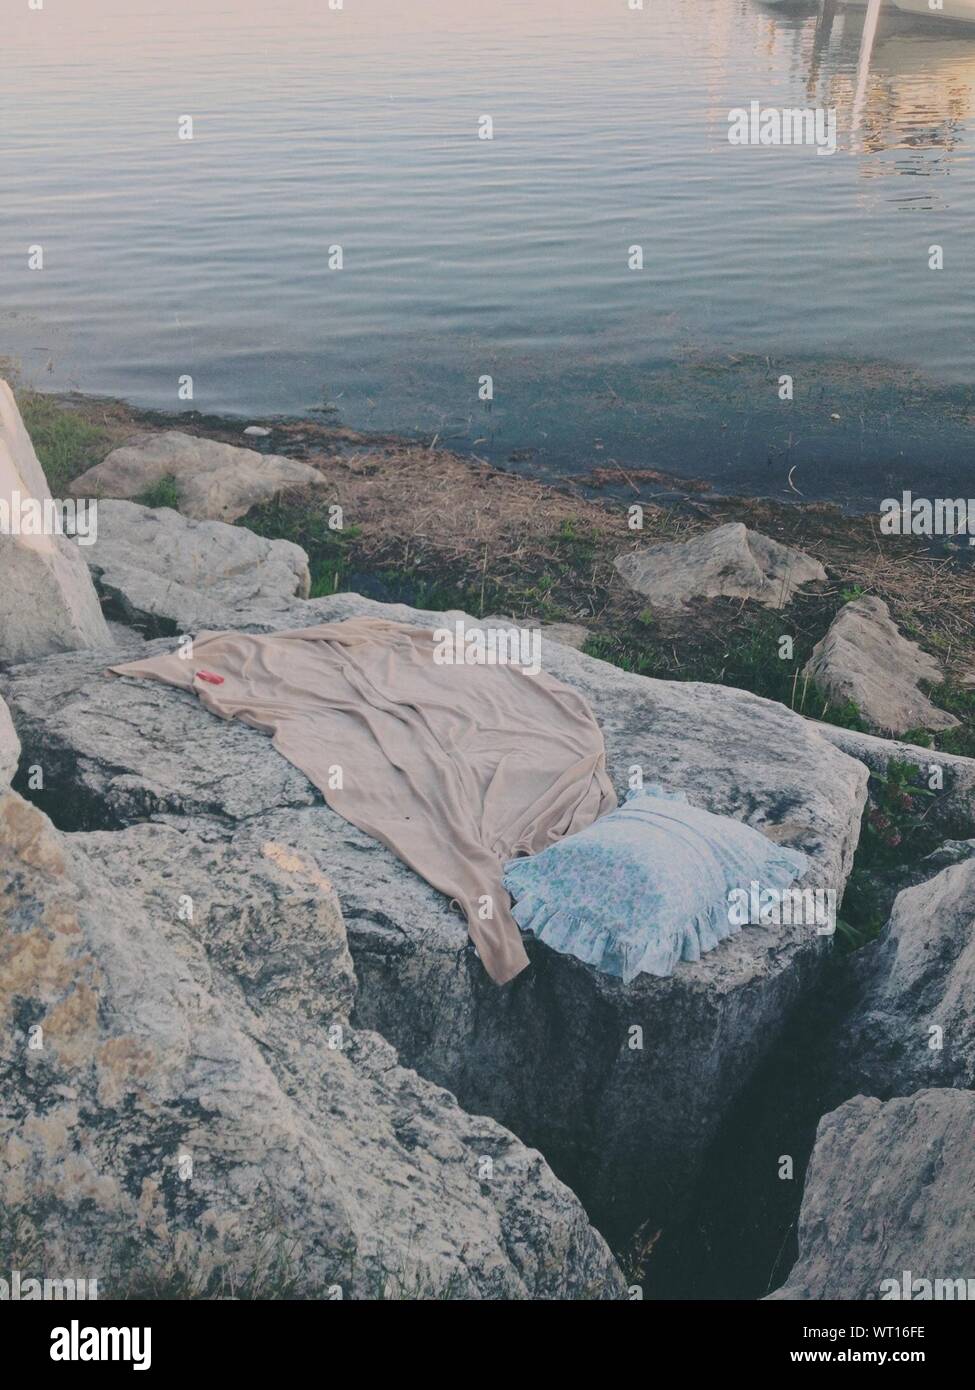 Abandoned Blouse And Pillow On Boulder Stock Photo